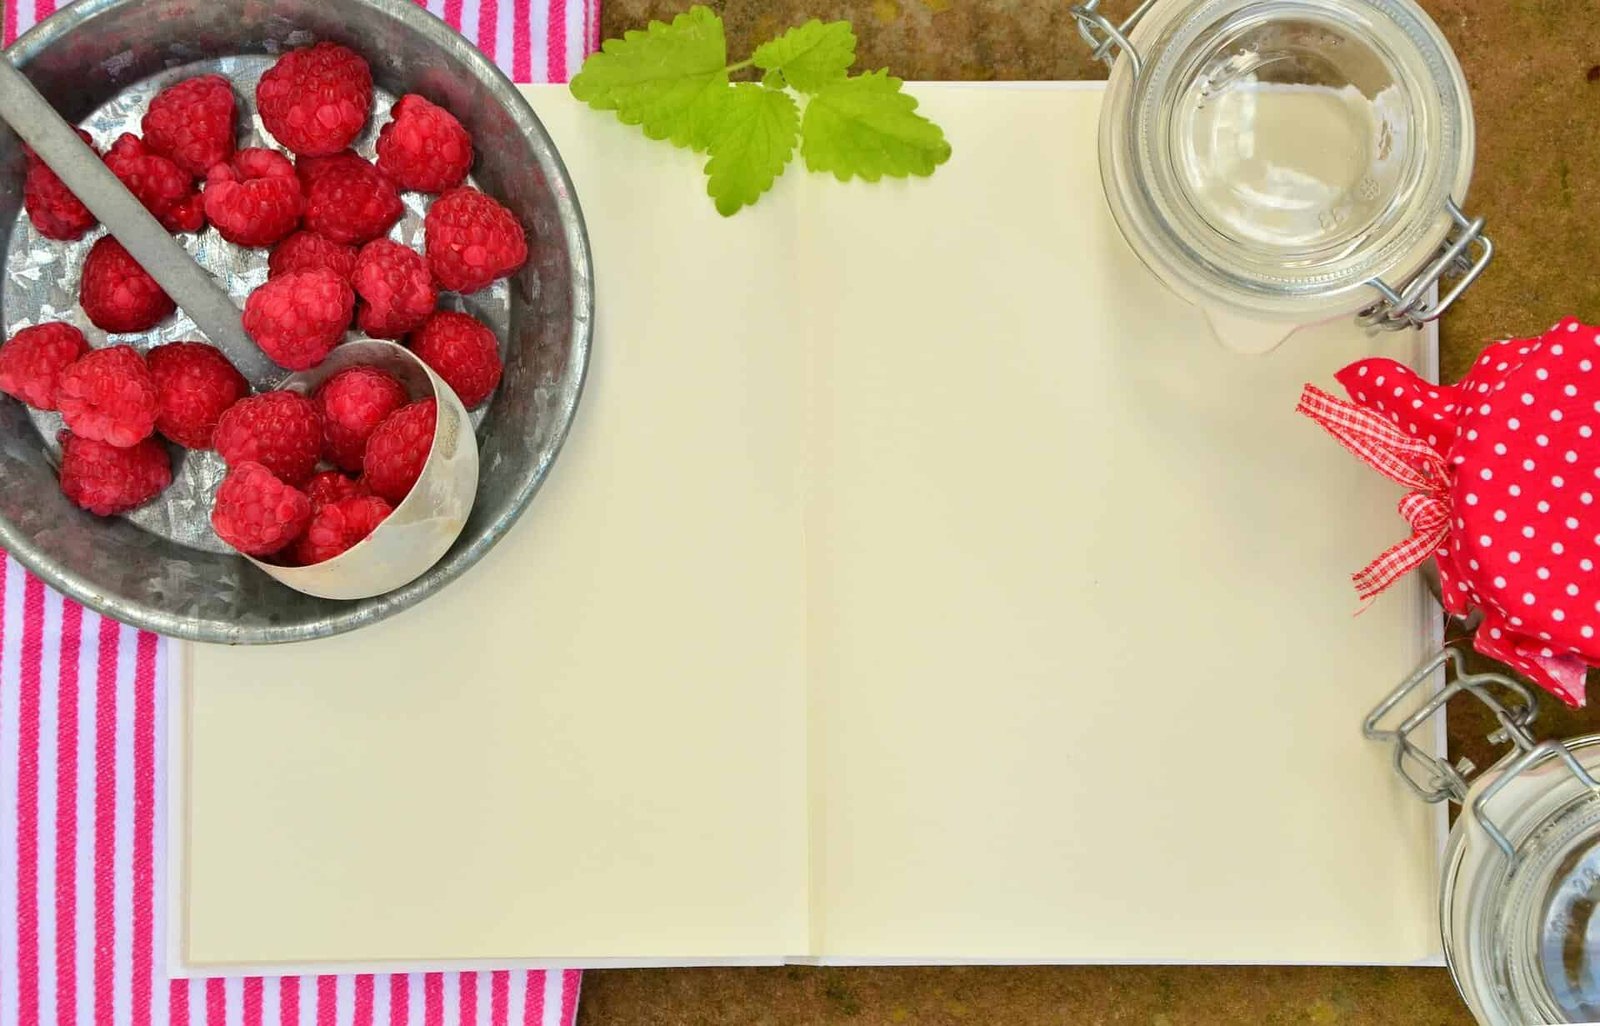 blank open book on top of dish towel, rasberries in a bucket with spoon, glass jar